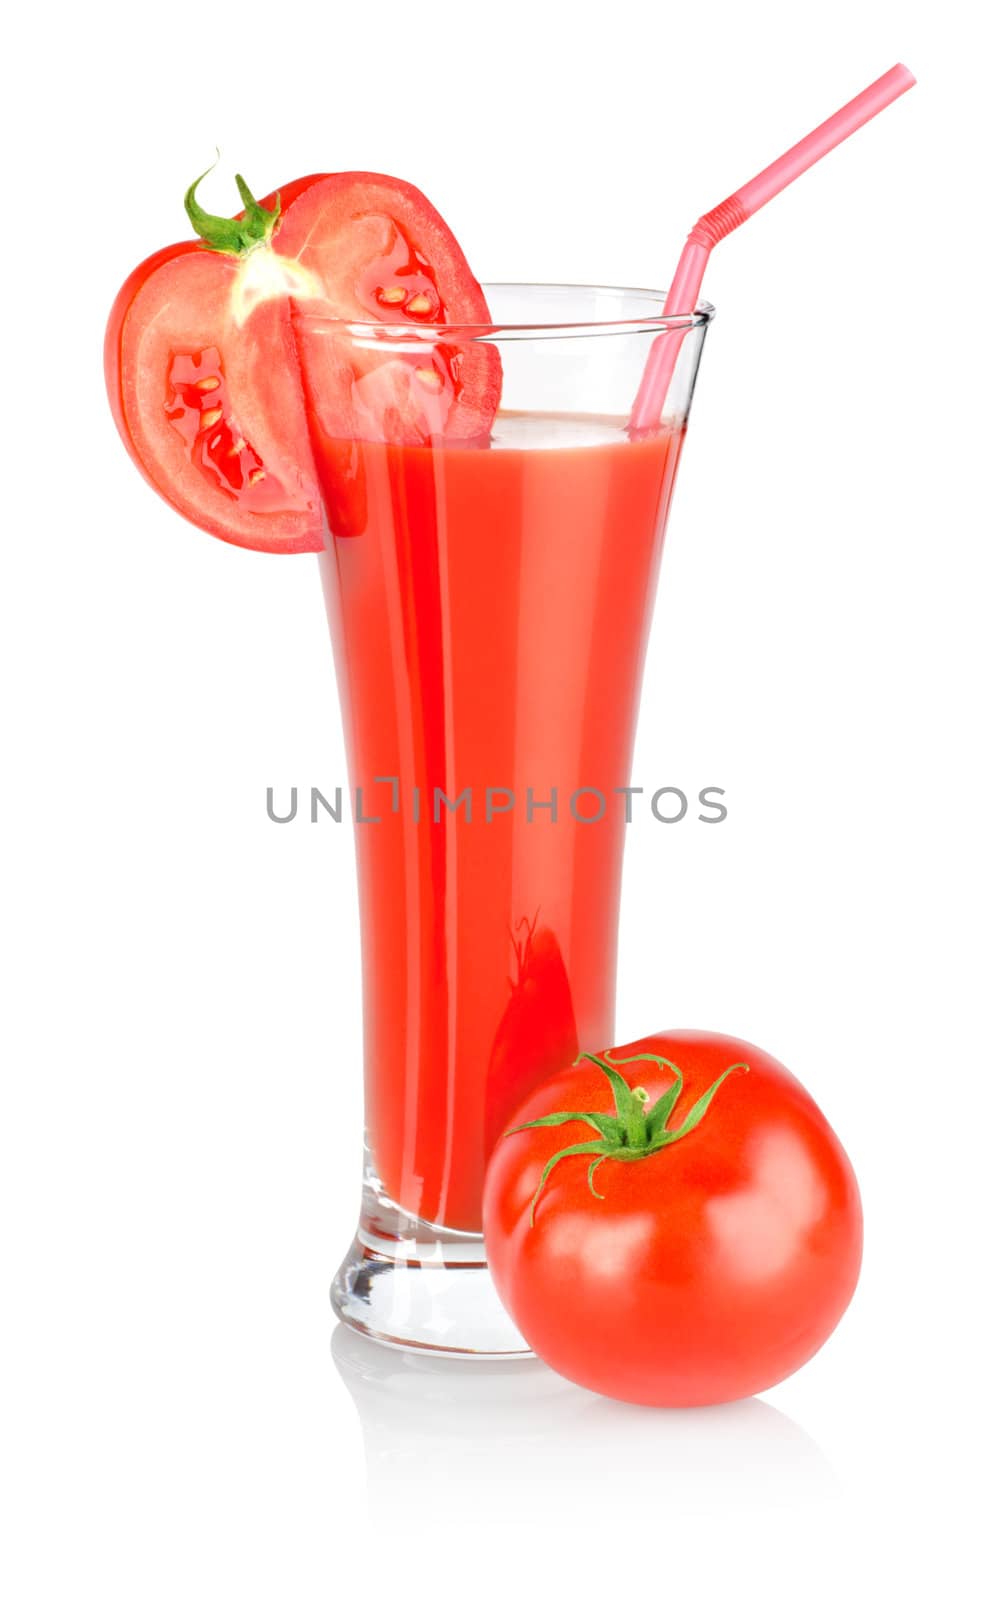 Tomato juice by Givaga